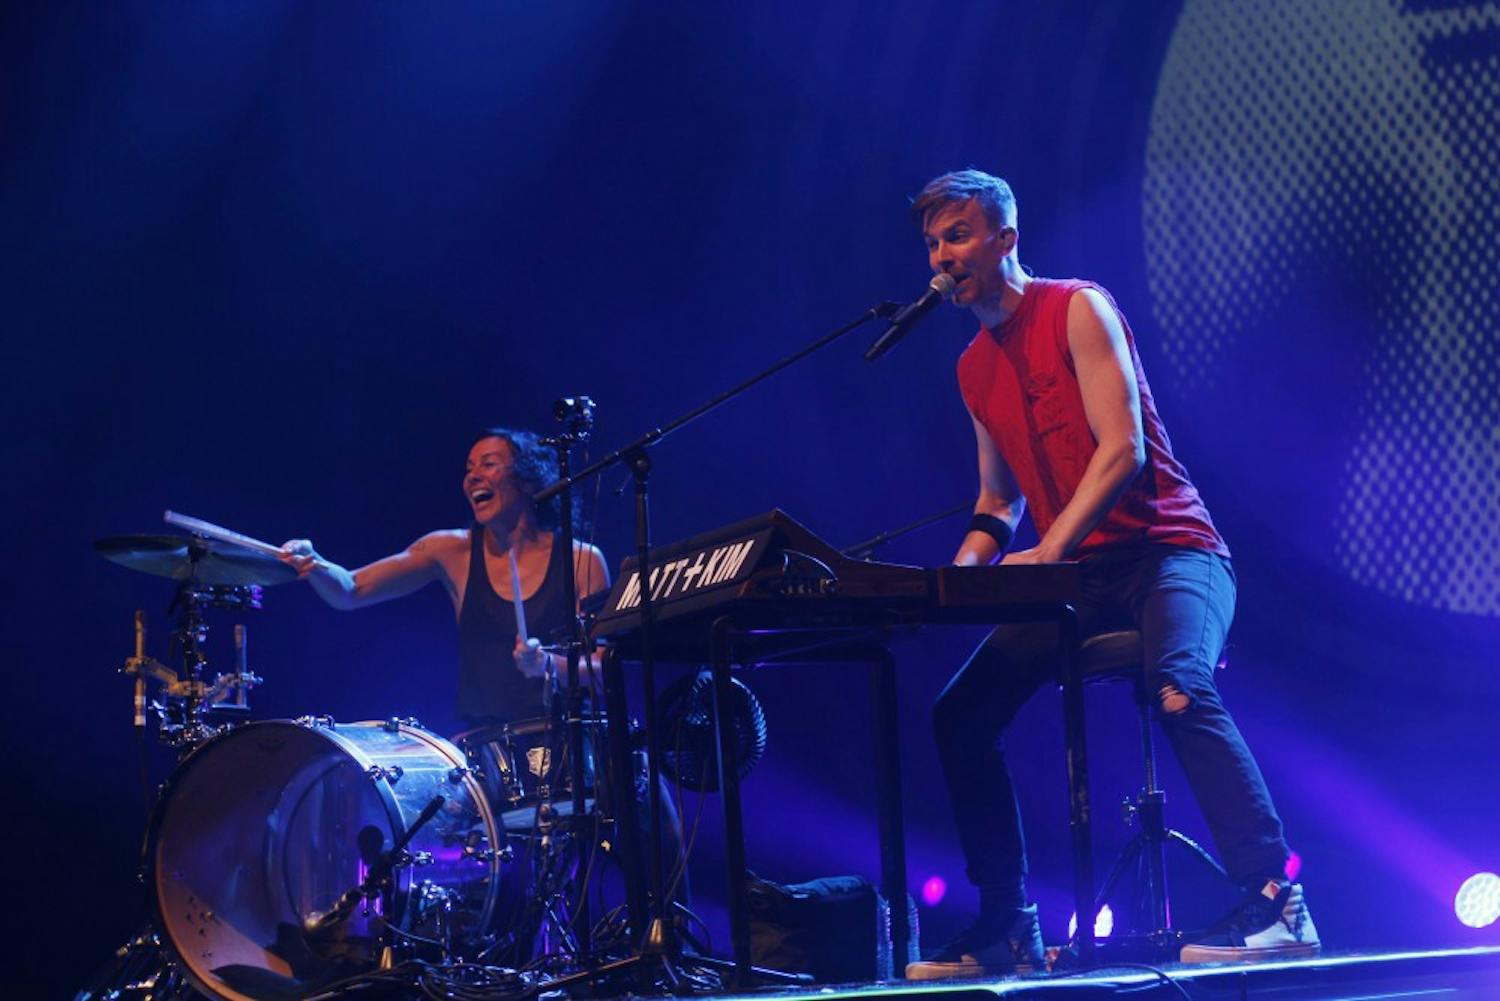 Pop-duo Matt and Kim brought an energetic performance to the Center for the Arts on Saturday, despite low attendance. Closers American Authors brought a calmness to the evening and mixed in new tracks an popular cuts like "Best Days of My Life."&nbsp;